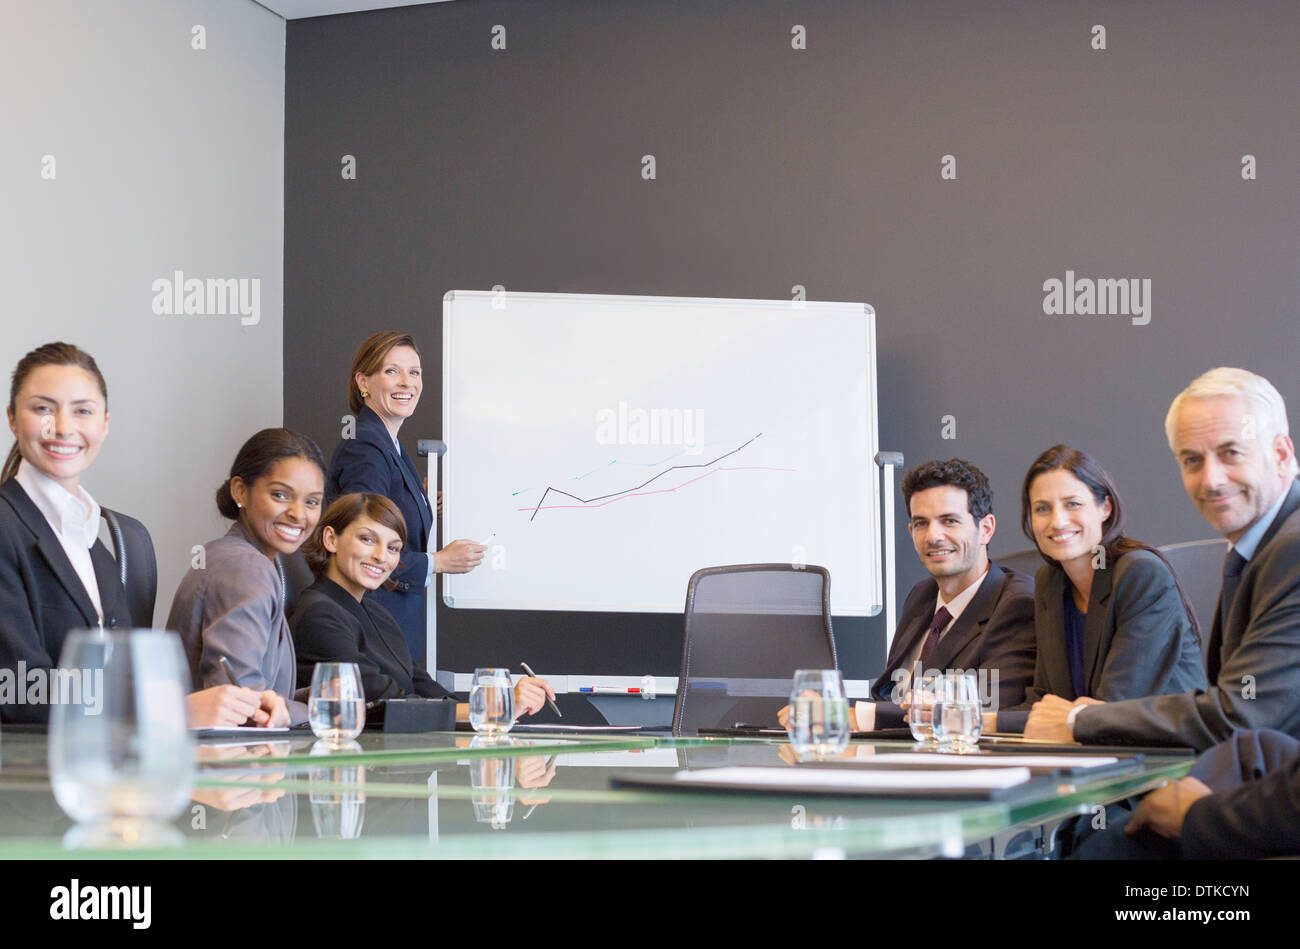 Businesswoman drawing graph for colleagues in meeting Stock Photo